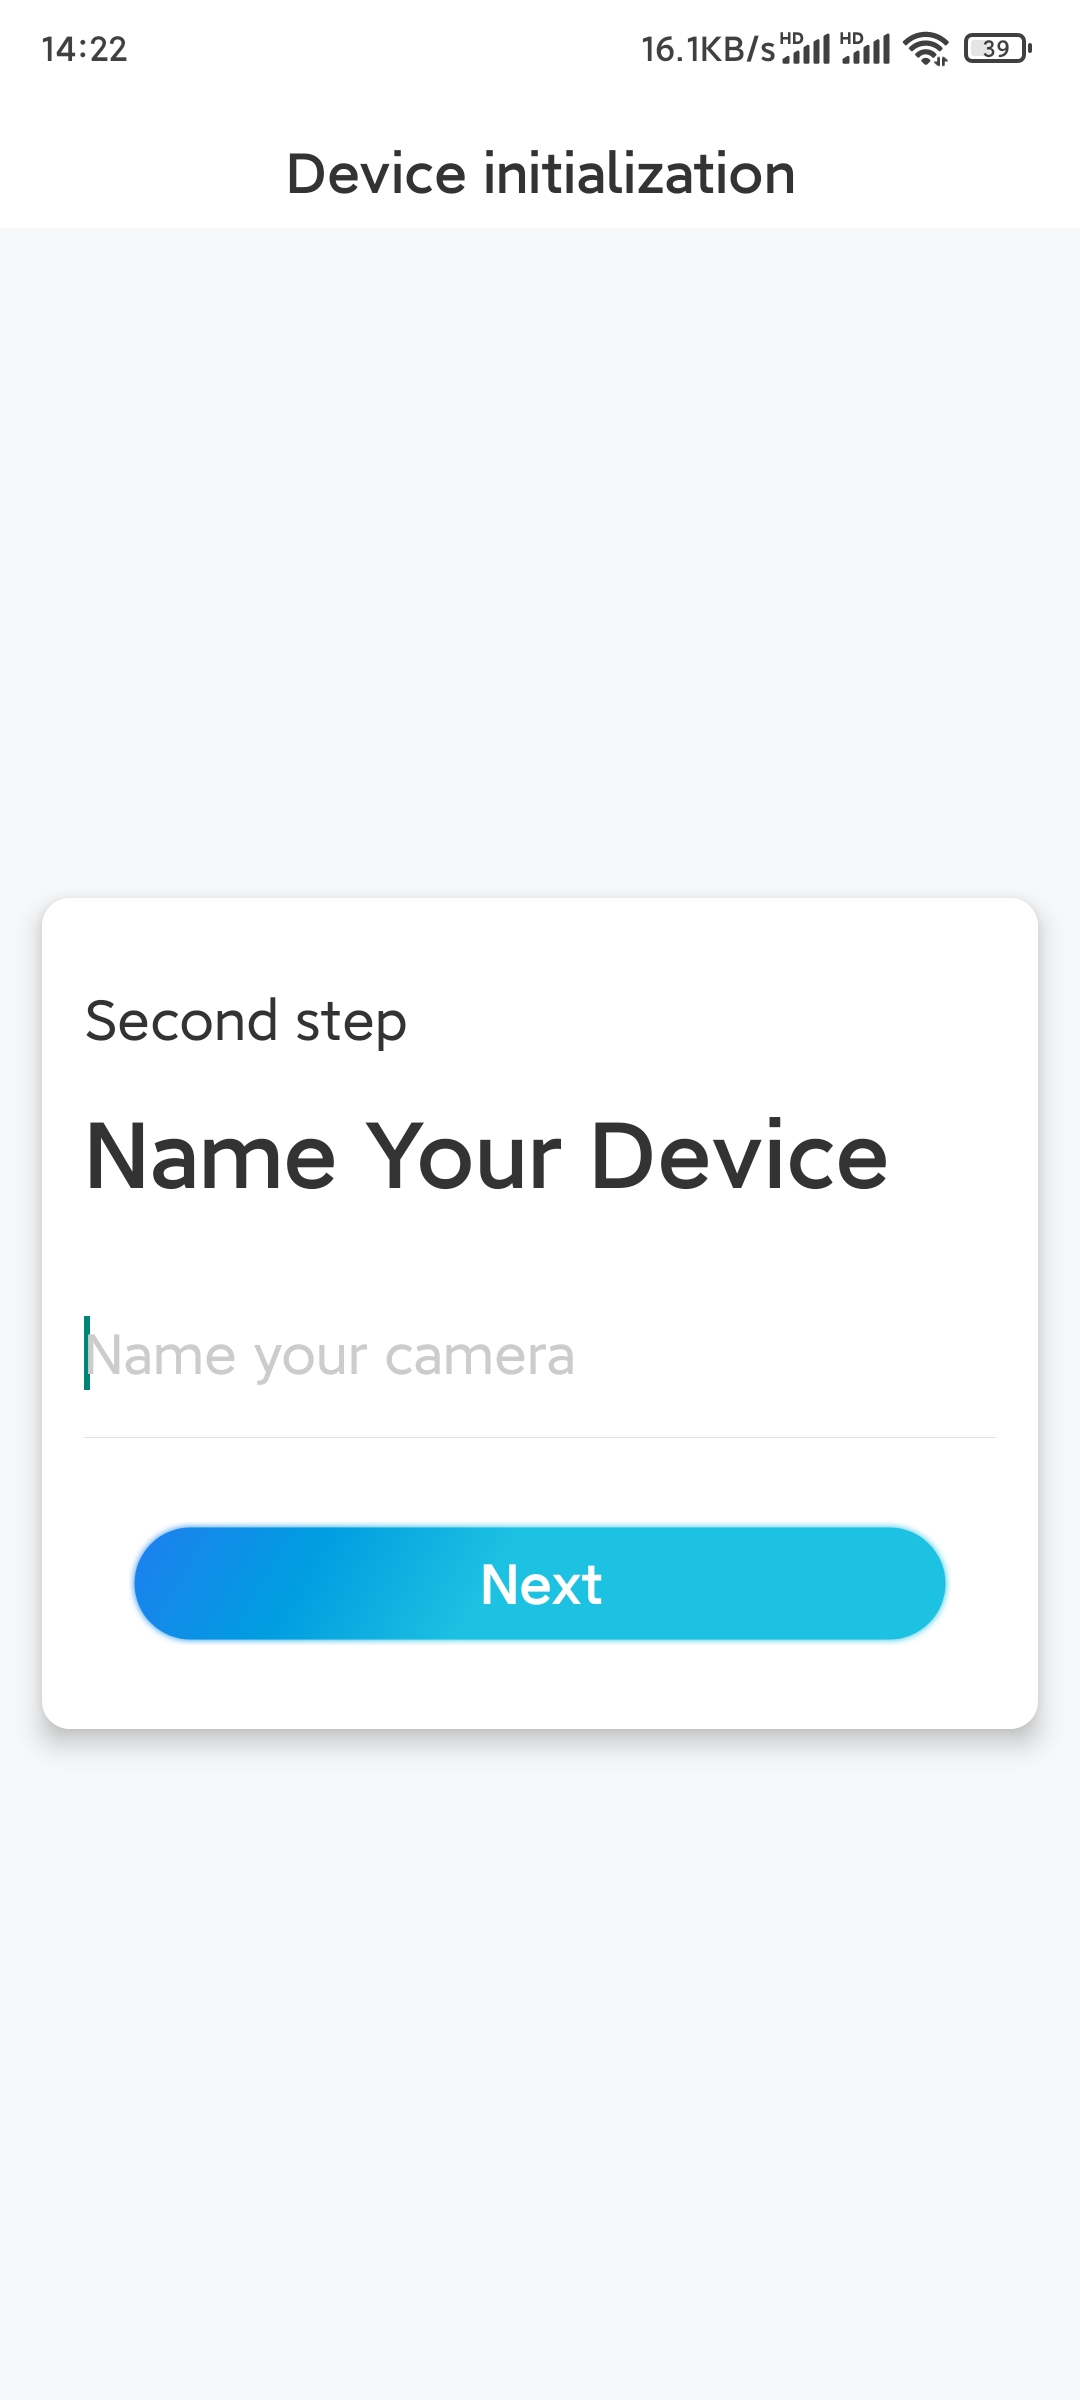 4.name_your_camera.jpg